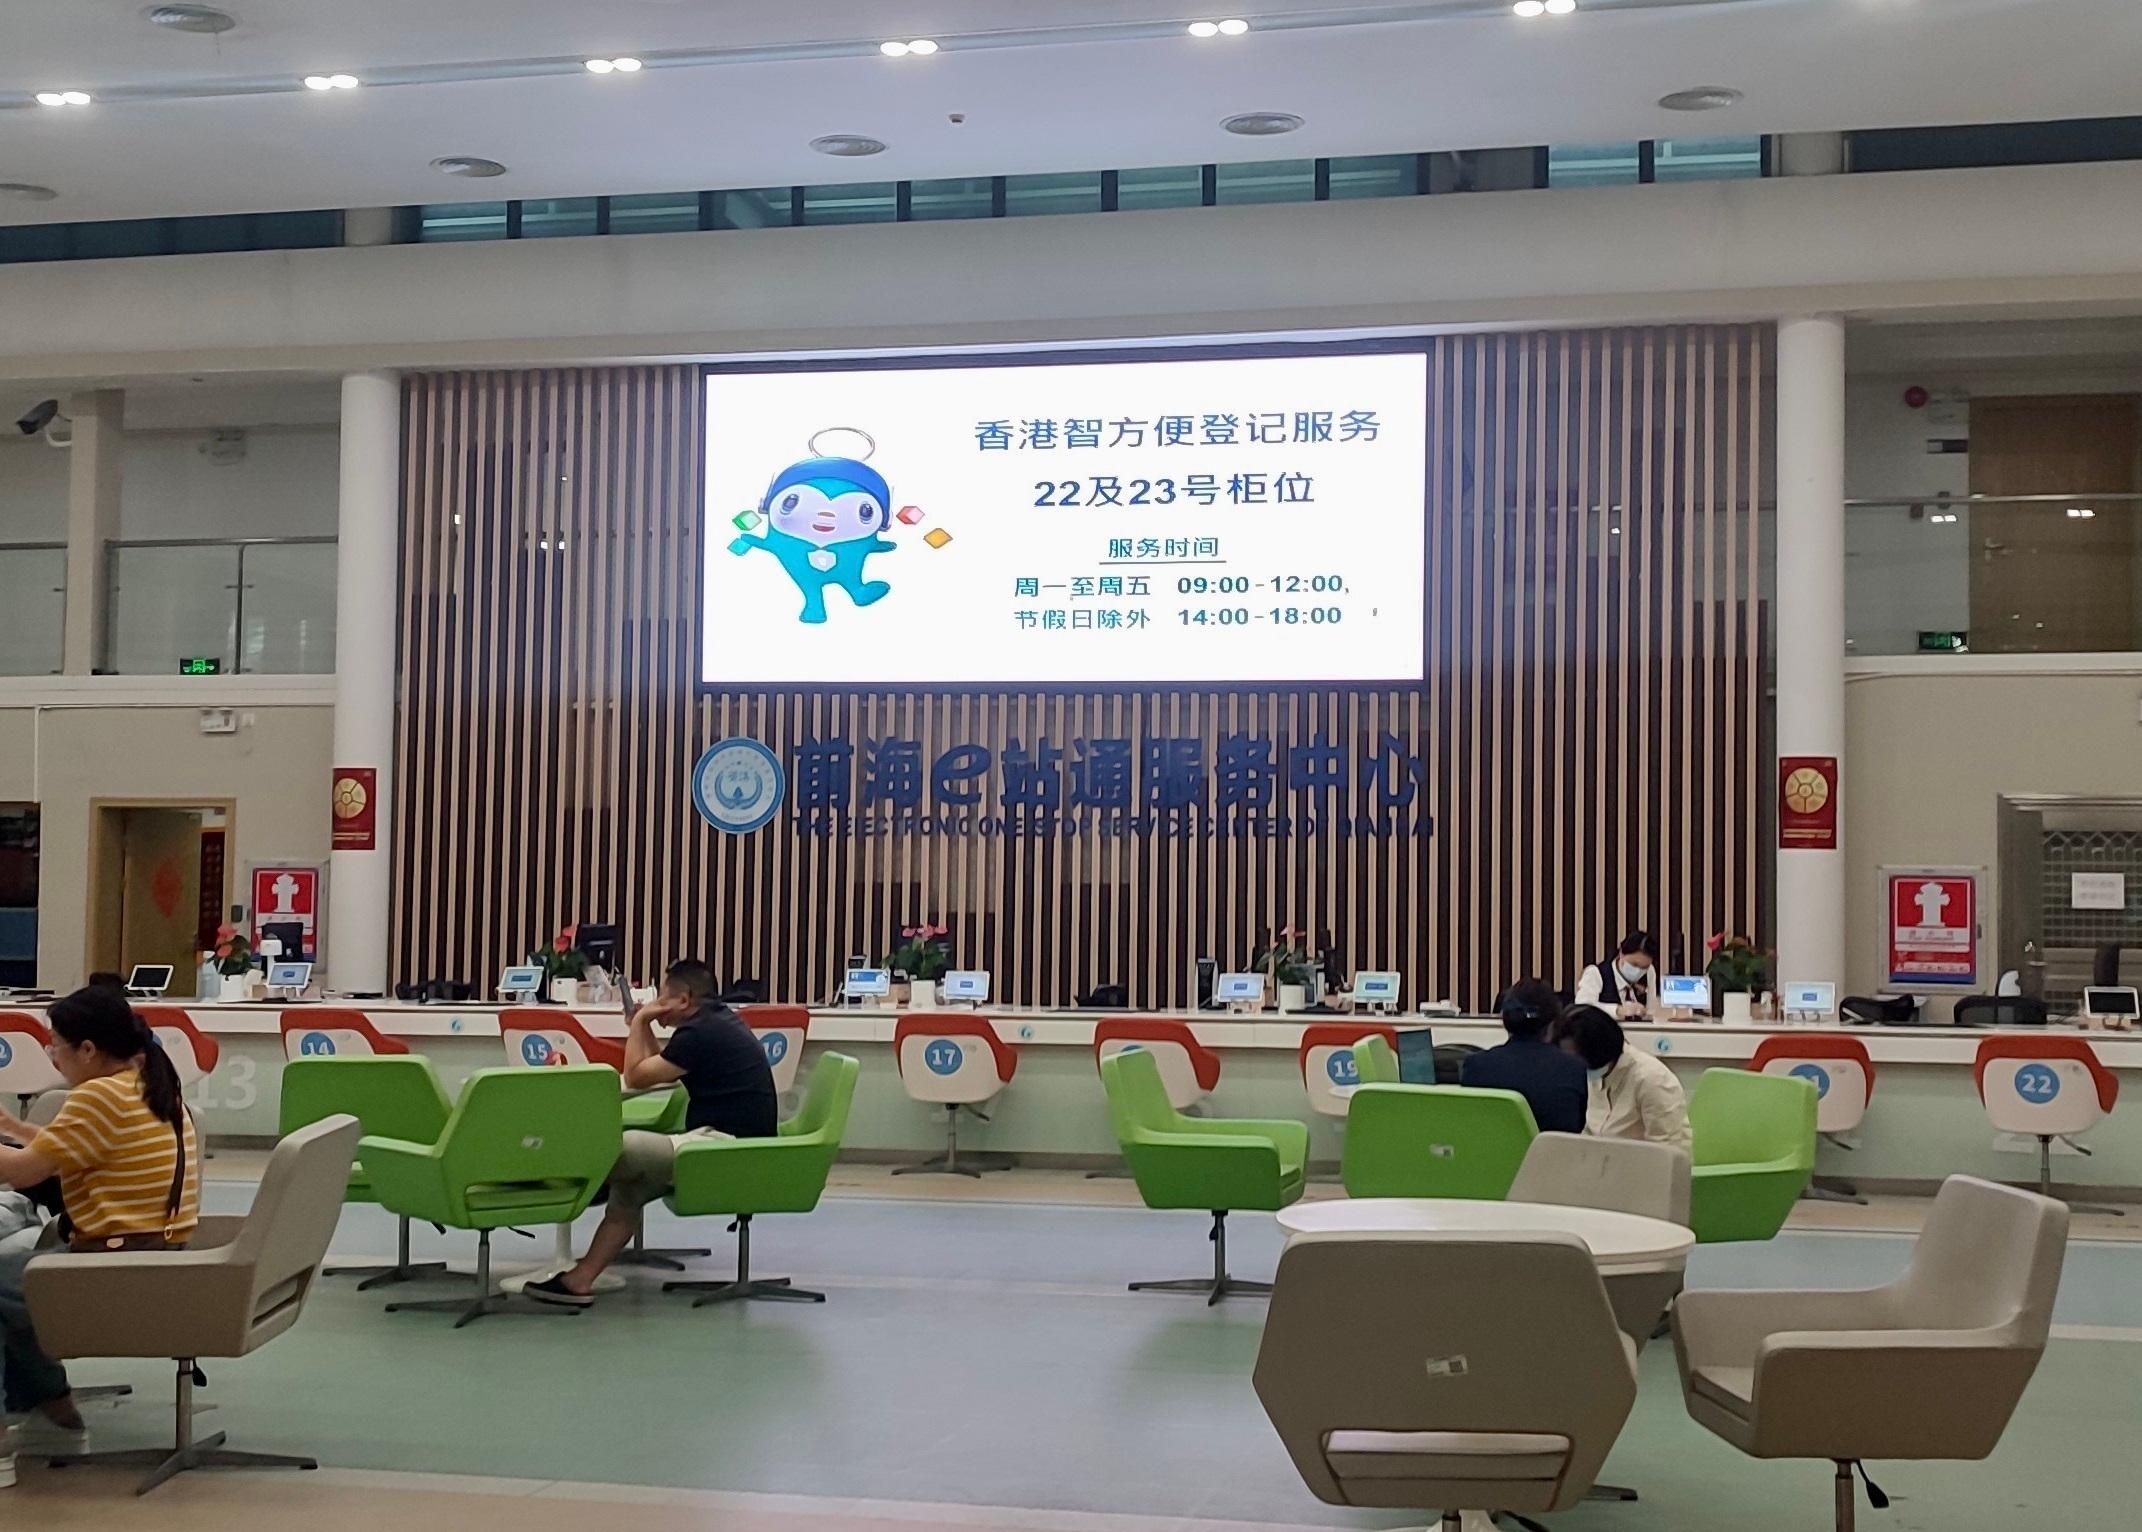 The Office of the Government Chief Information Officer sets up an "iAM Smart" registration service counter on the ground floor of the Qianhai e-Station Government Service Center of Shenzhen Municipality. Hong Kong citizens on the Mainland can register for or upgrade to "iAM Smart+" without the need to return to Hong Kong.